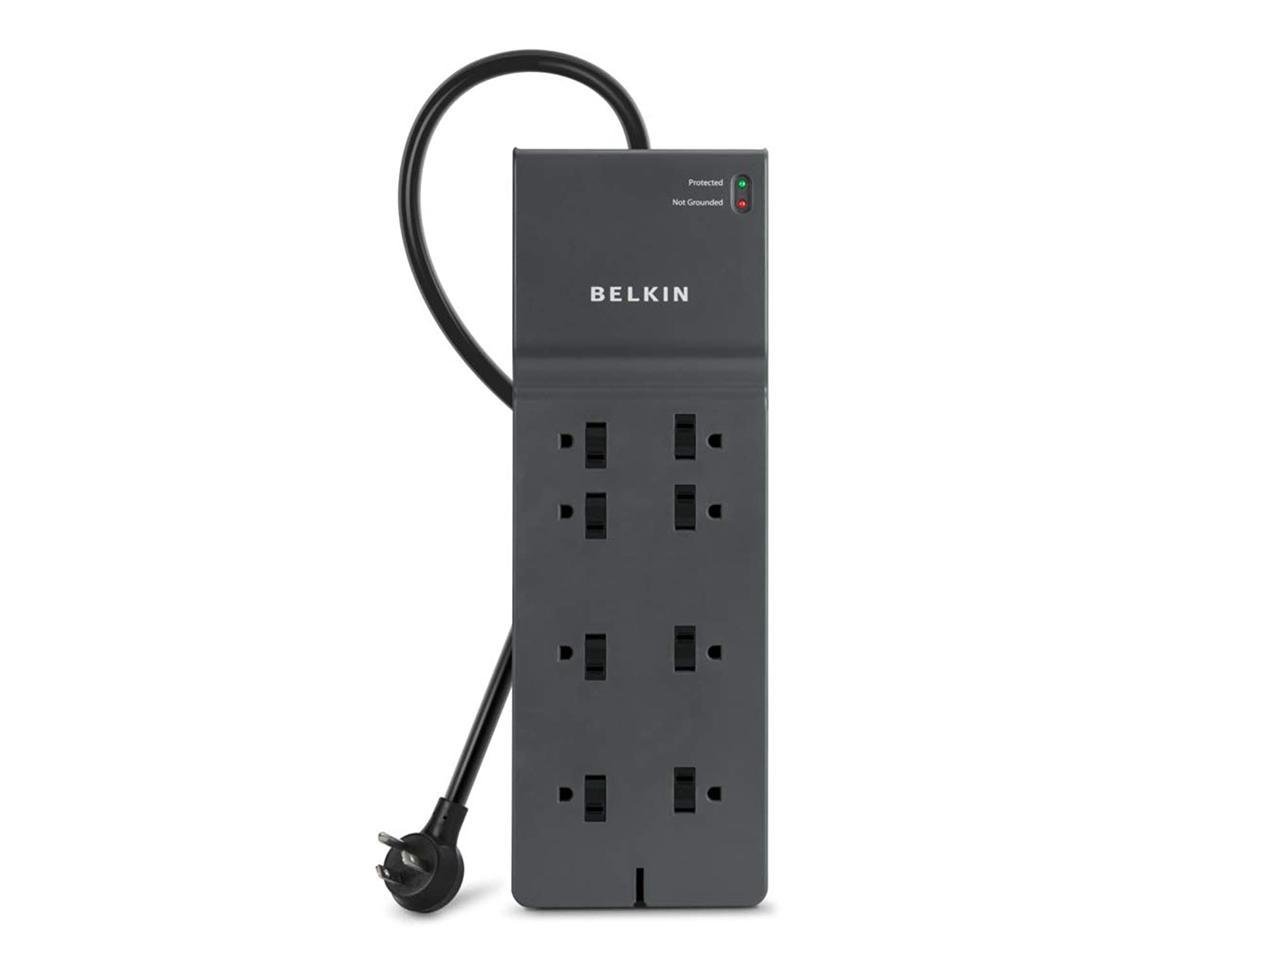 Belkin 8-Outlet Power Strip Surge Protector w/ Flat Plug, 8ft Cord – Ideal for Computers, Home Theatre, Appliances, Office Equipment (2,500 Joules)